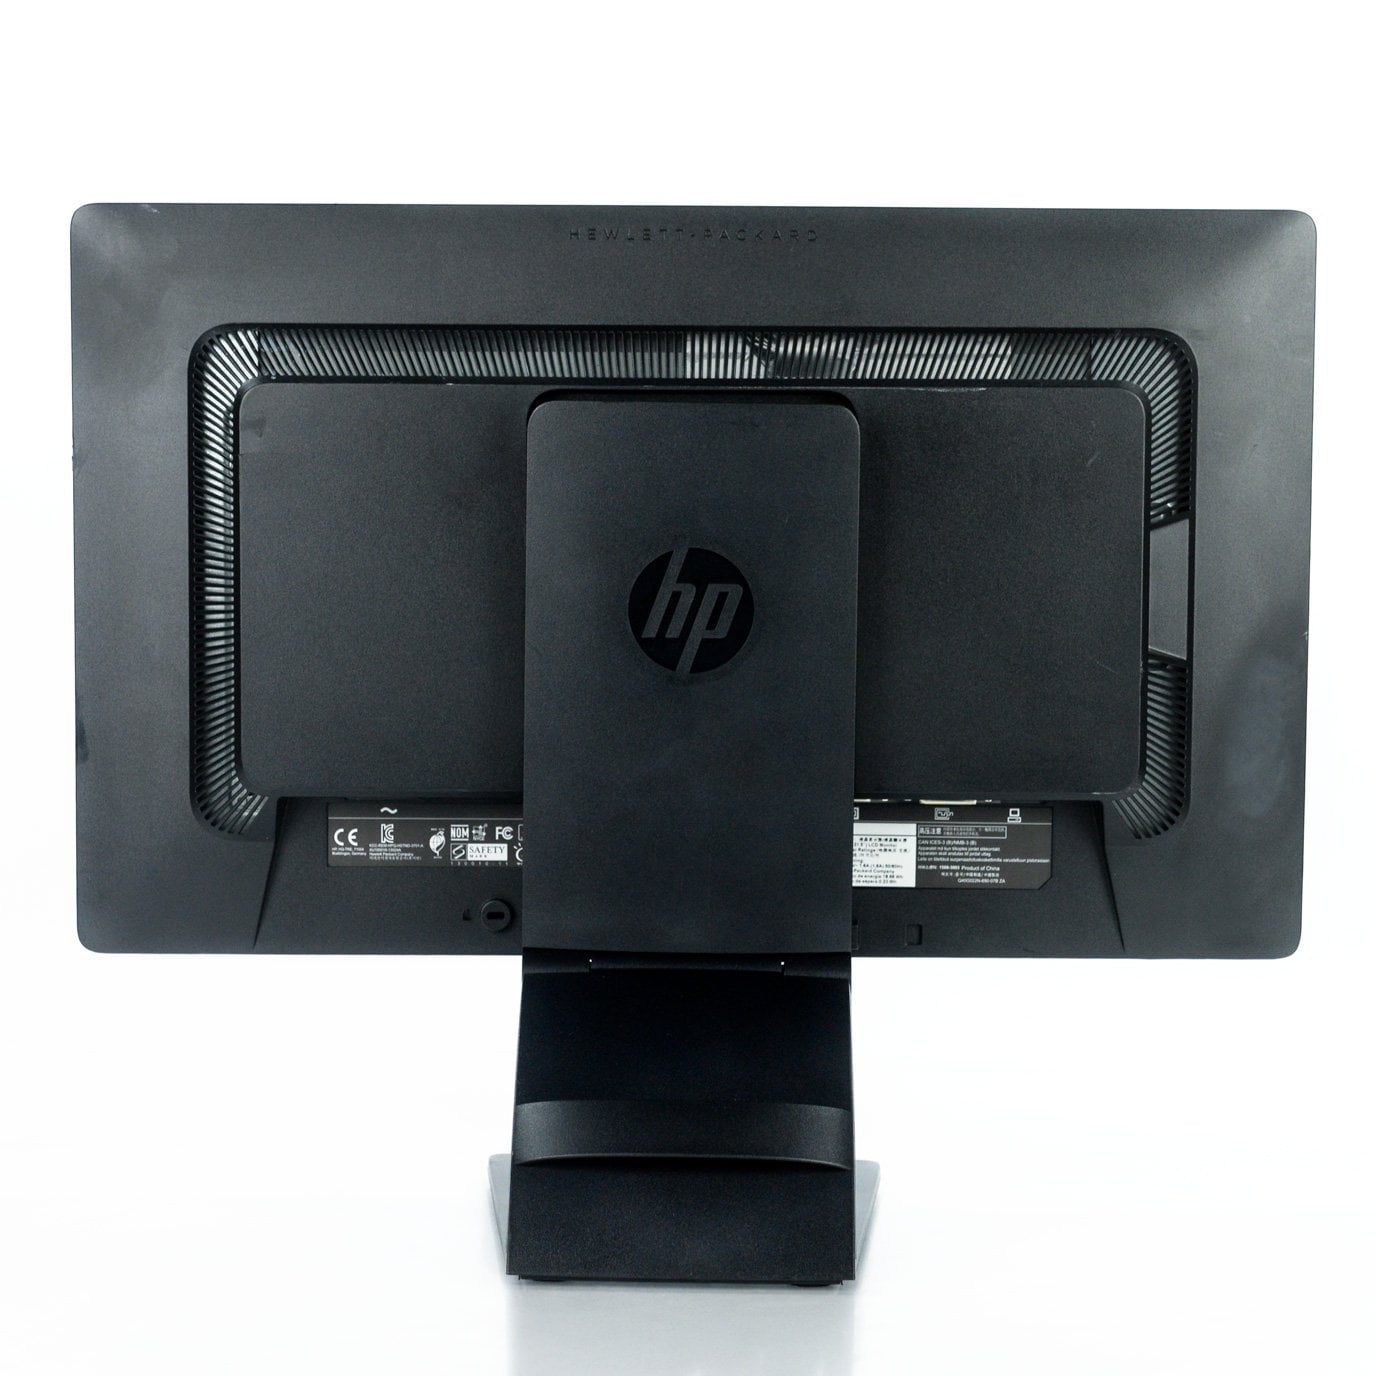 Buy Hp E221 21.5" LED LCD Monitor - 16:9 - 5 ms Used Price in Pakistan